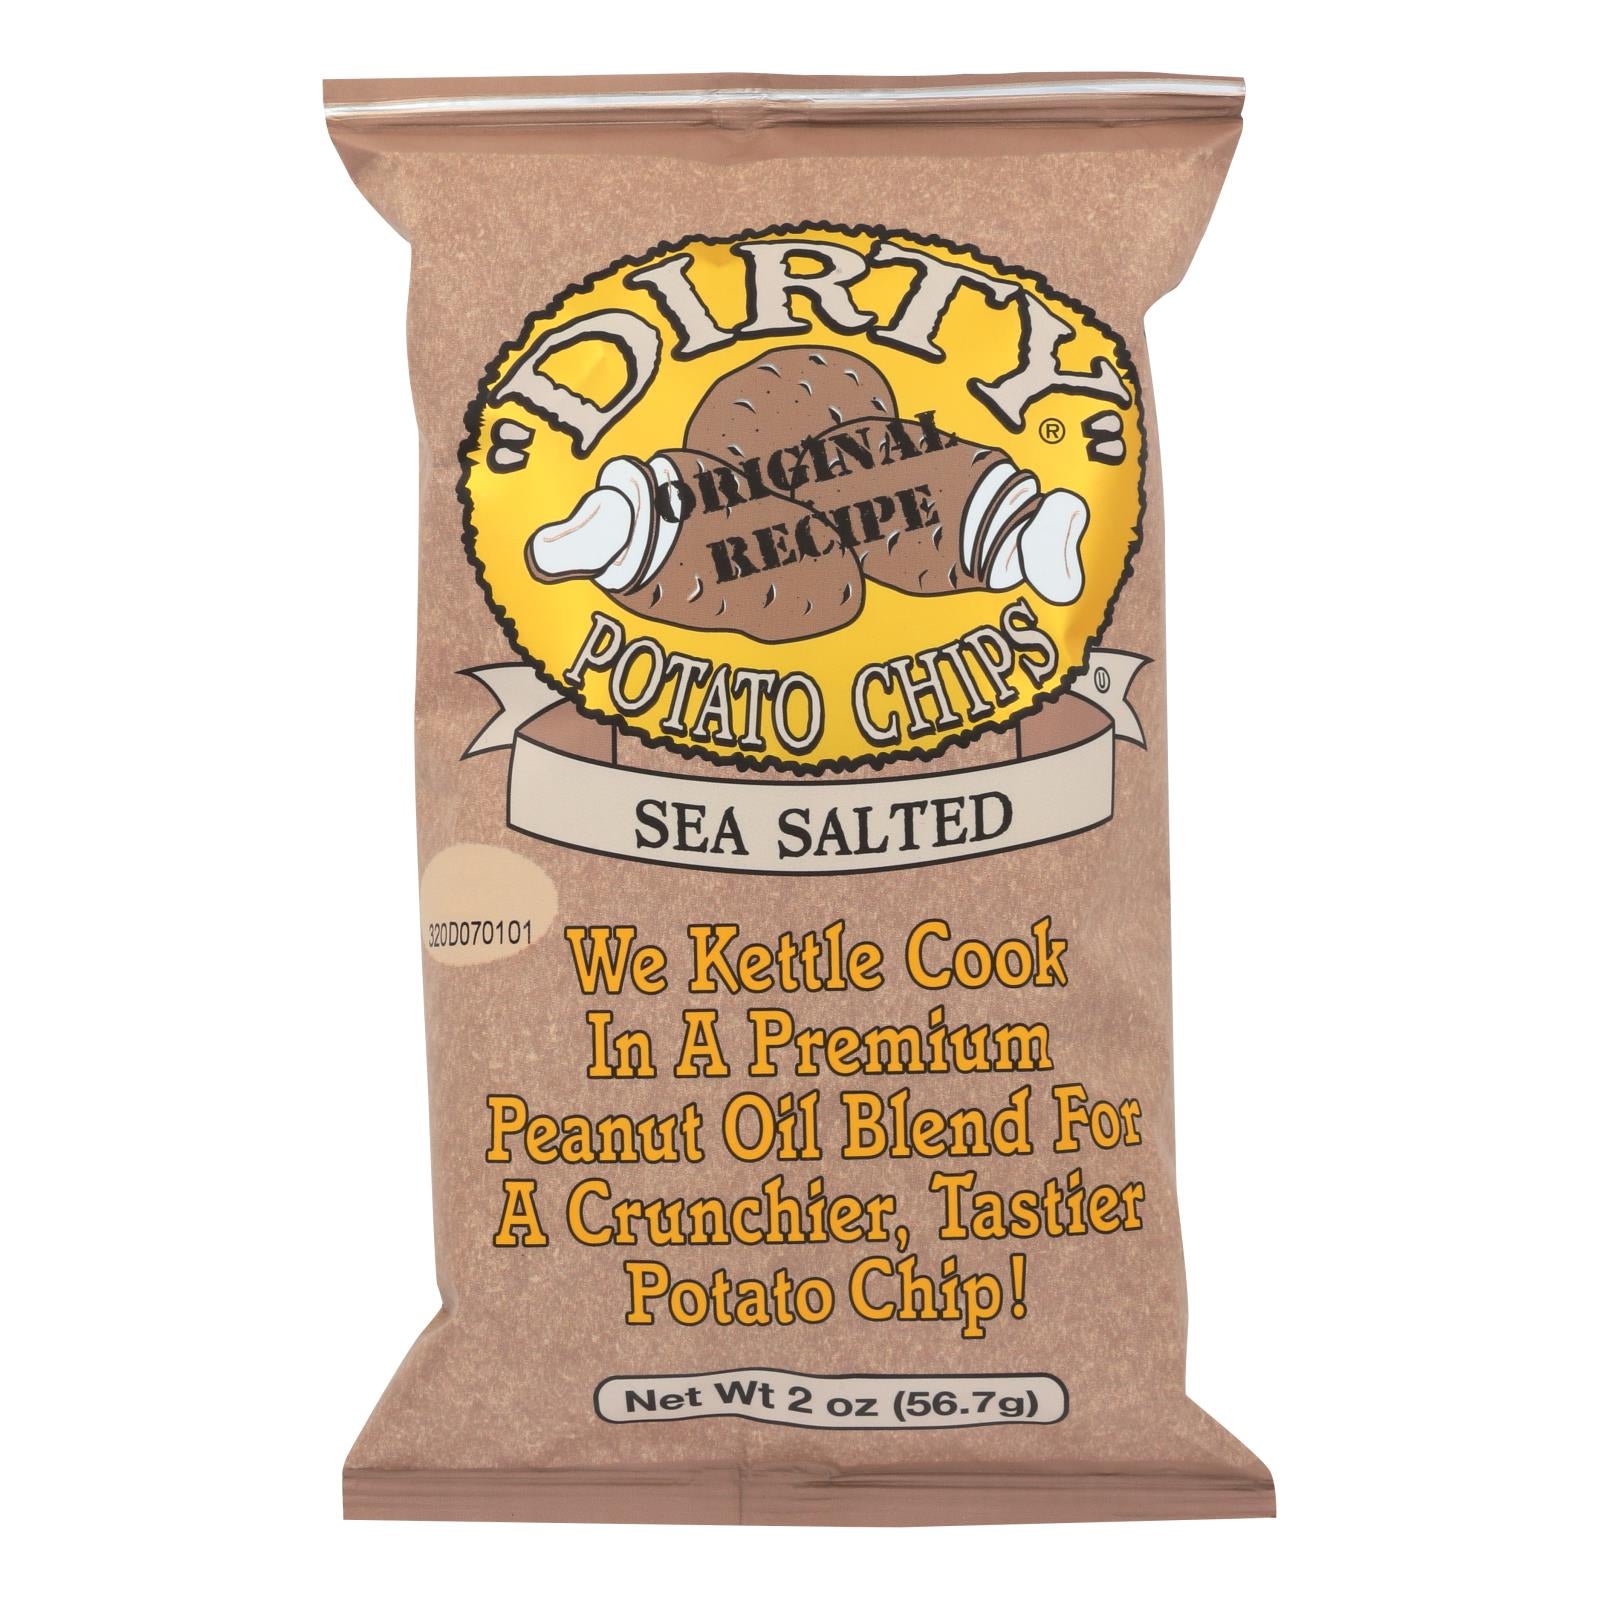 Dirty Chips - Potato Chips - Sea Salted - Case Of 25 - 2 Oz.